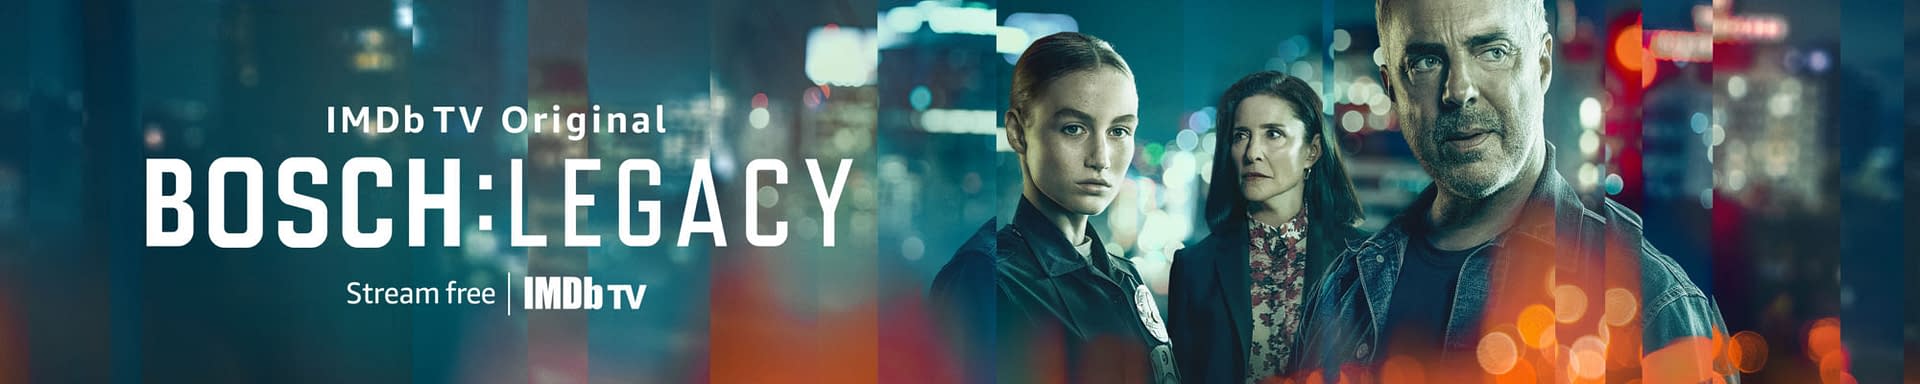 For Bosch, It's About The Legacy He Leaves: IMDb TV Teaser/Poster